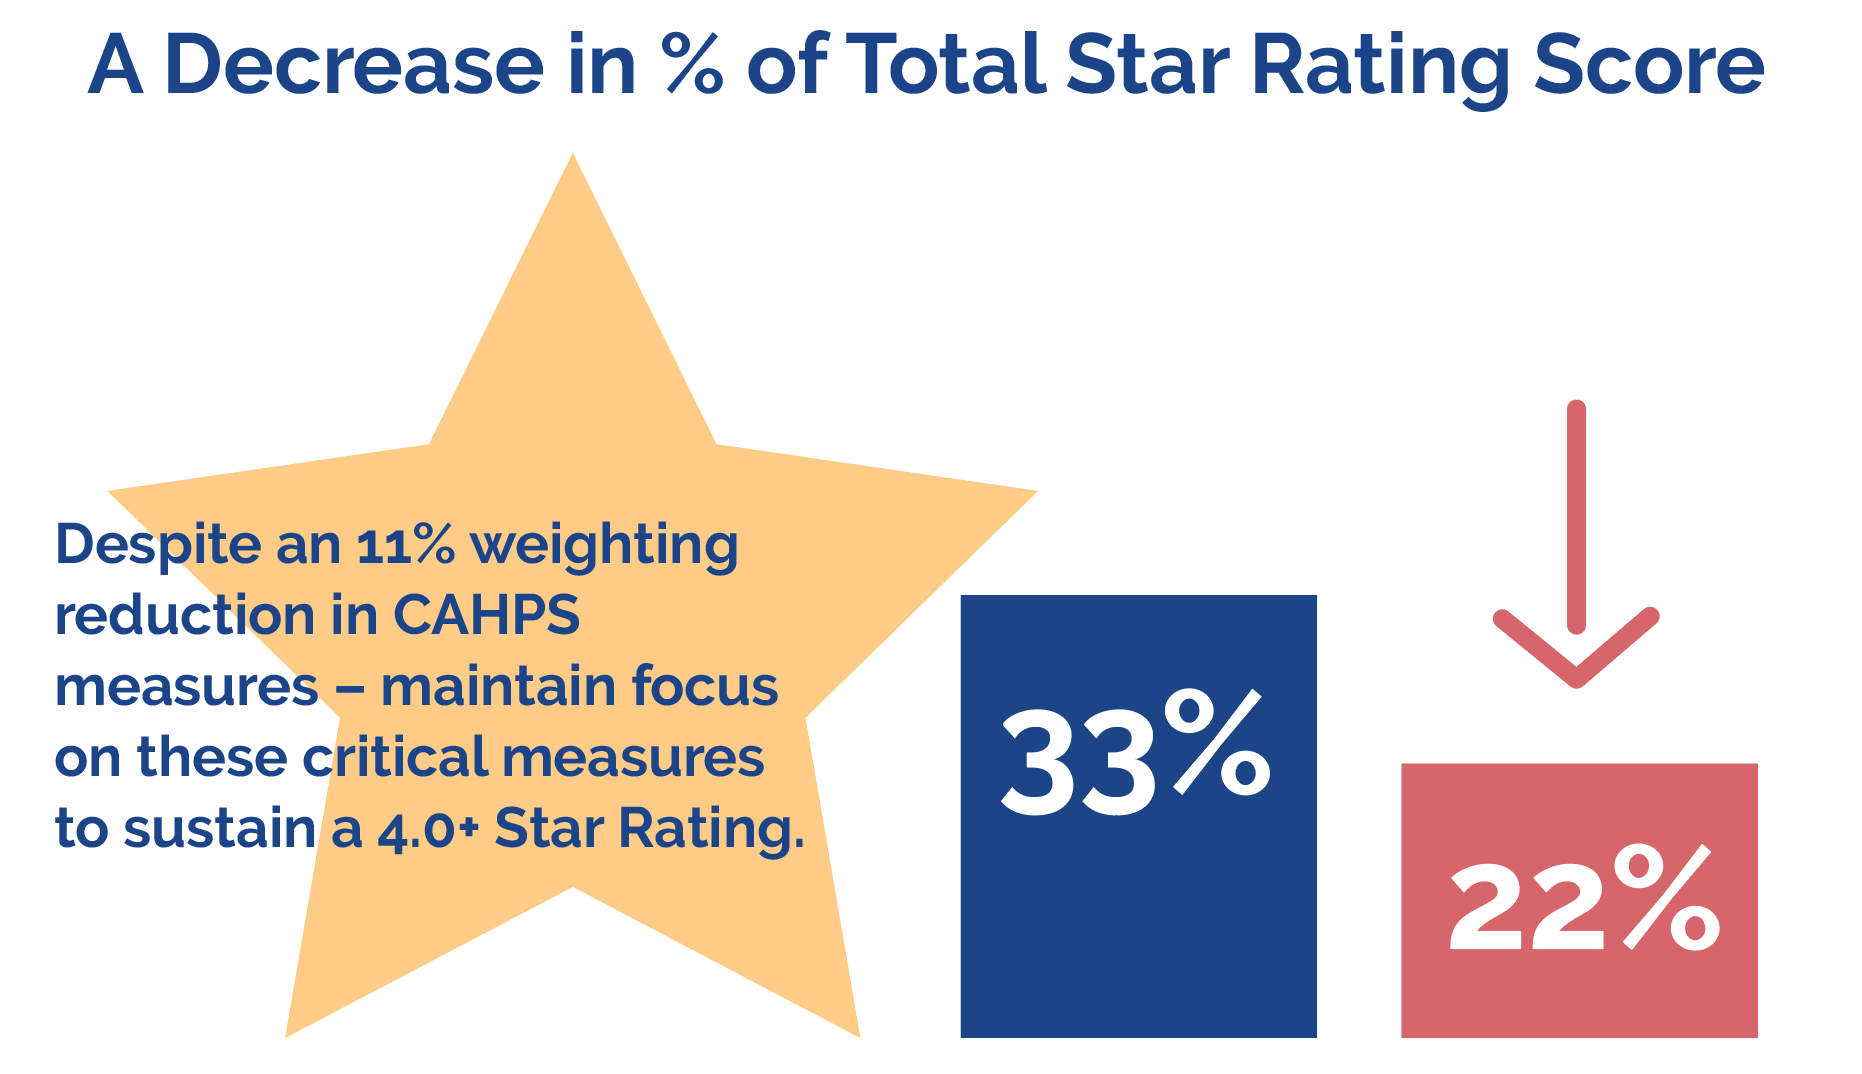 A Decrease in % of Total Star Rating Score | Image Credit: AdhereHealth